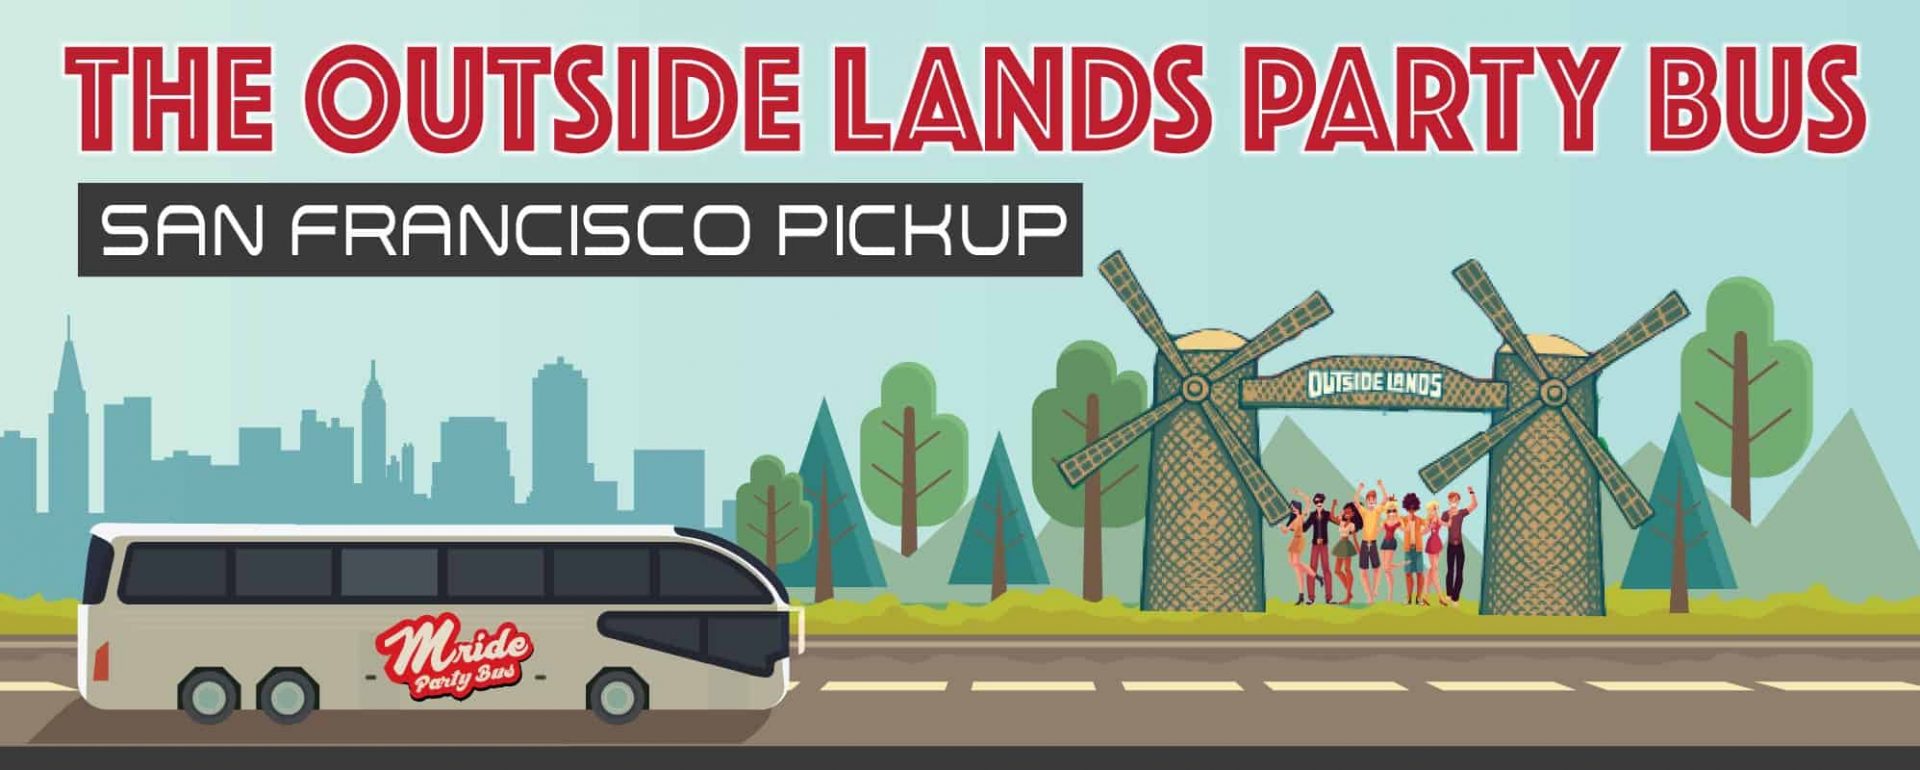 Outside Lands Party Bus